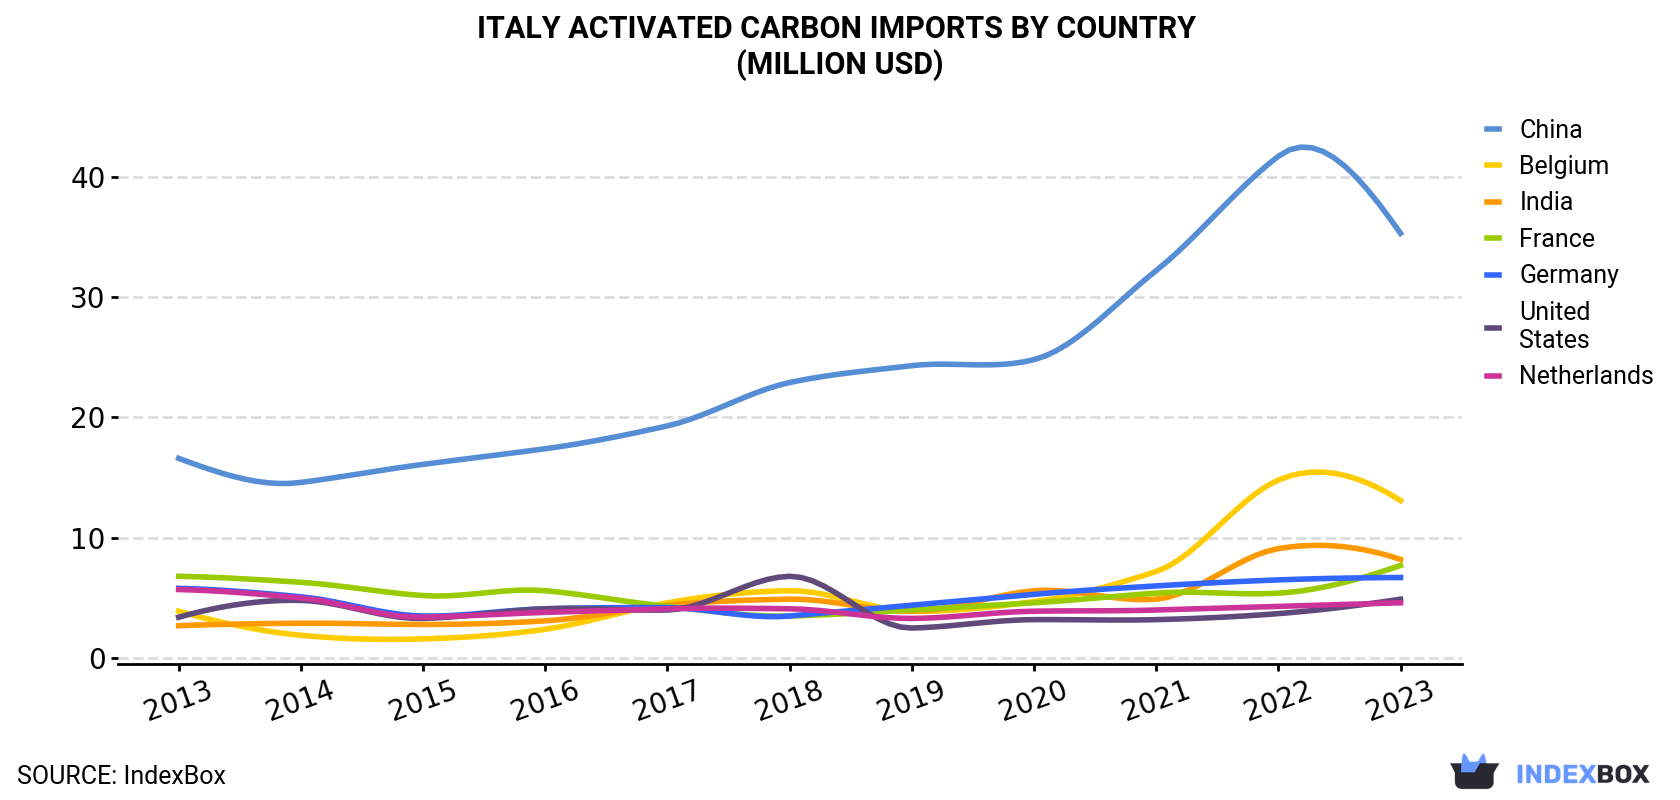 Italy Activated Carbon Imports By Country (Million USD)